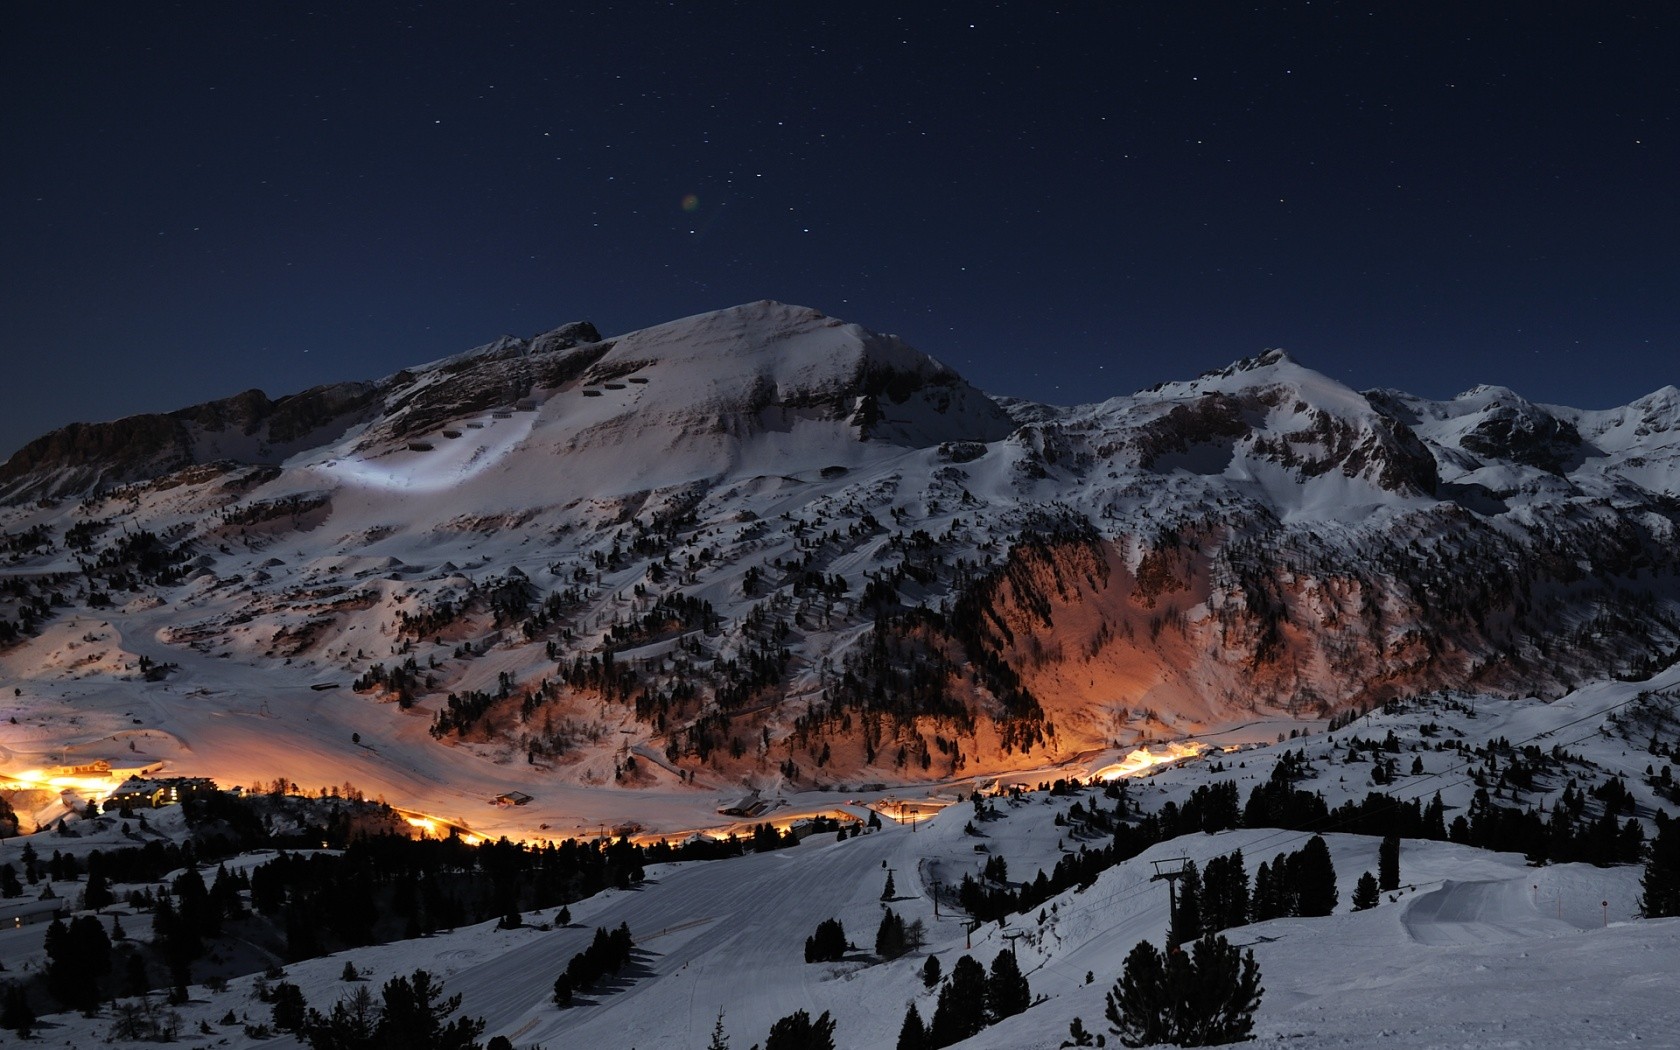 General 1680x1050 landscape night mountains sky winter snow lights ski resort Canada outdoors nature